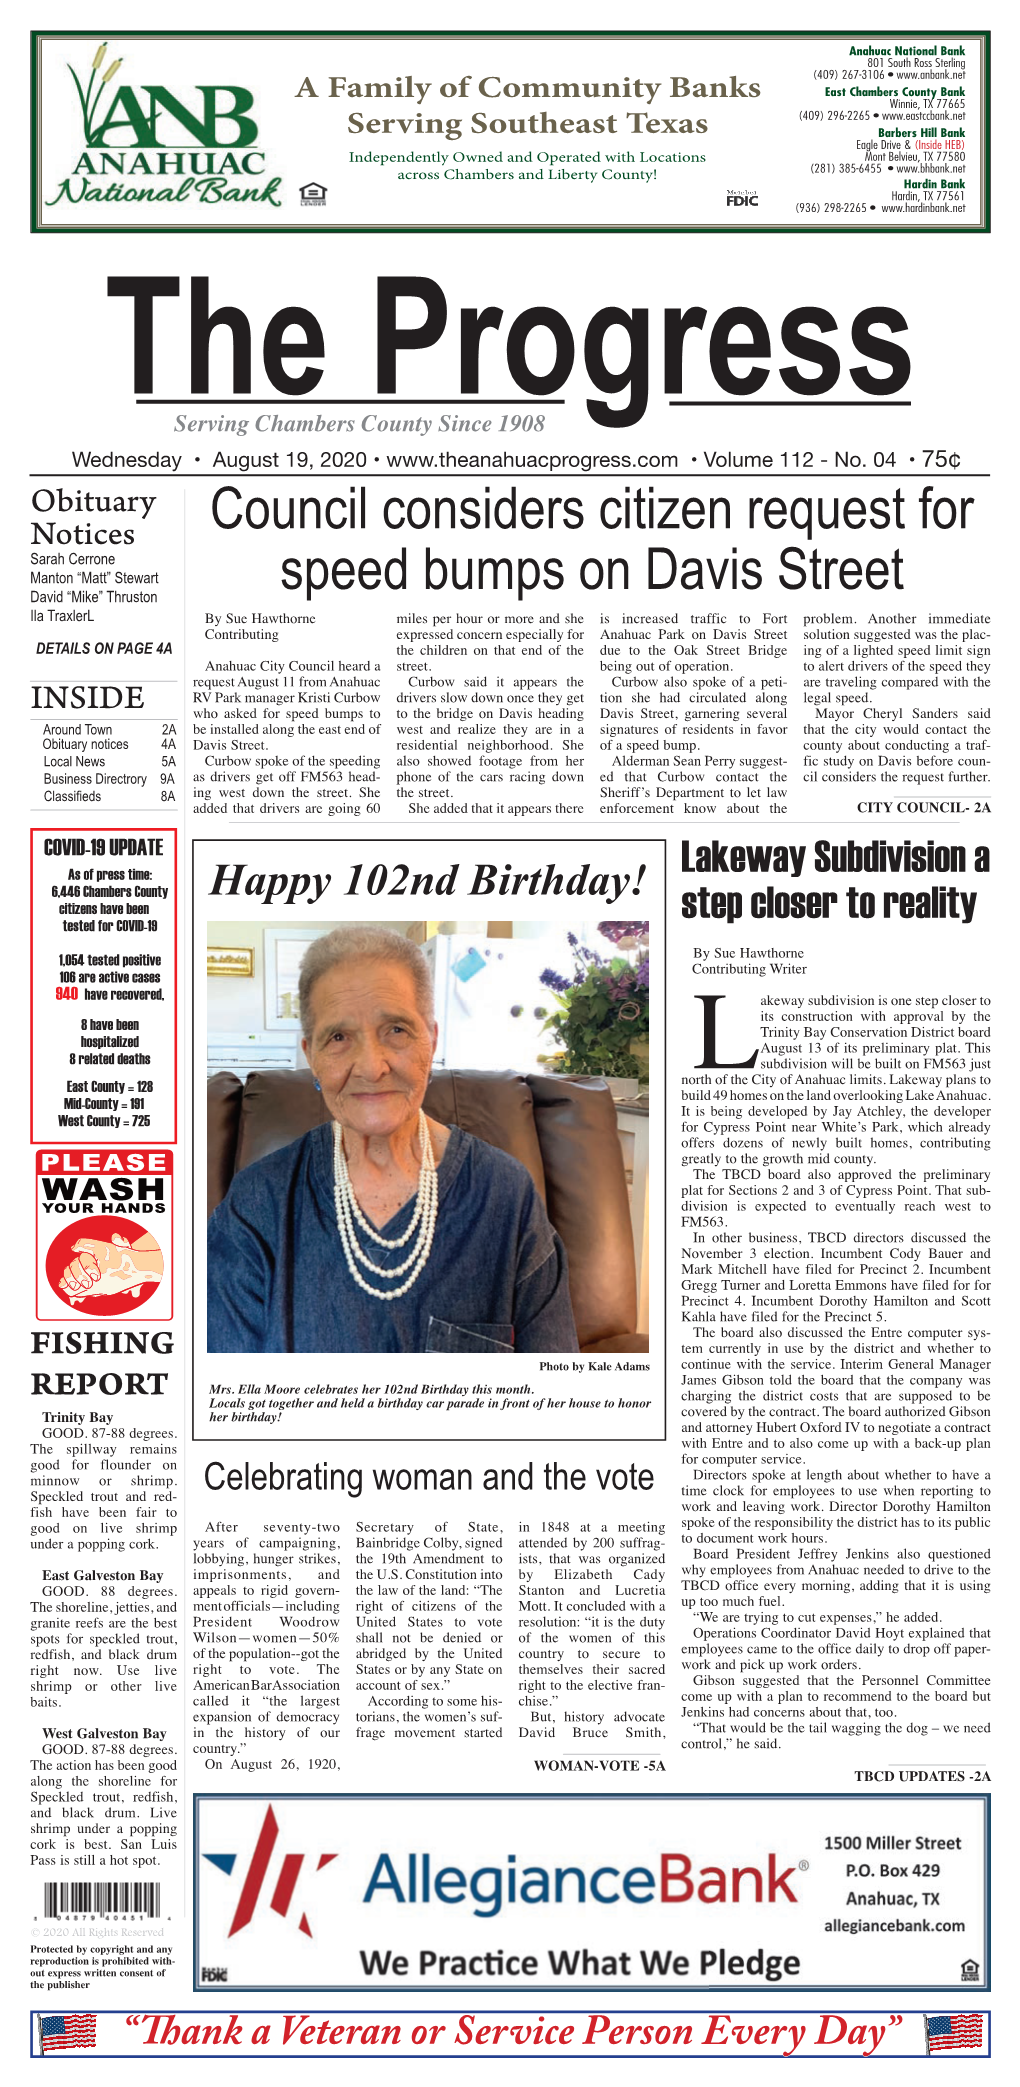 Council Considers Citizen Request for Speed Bumps on Davis Street